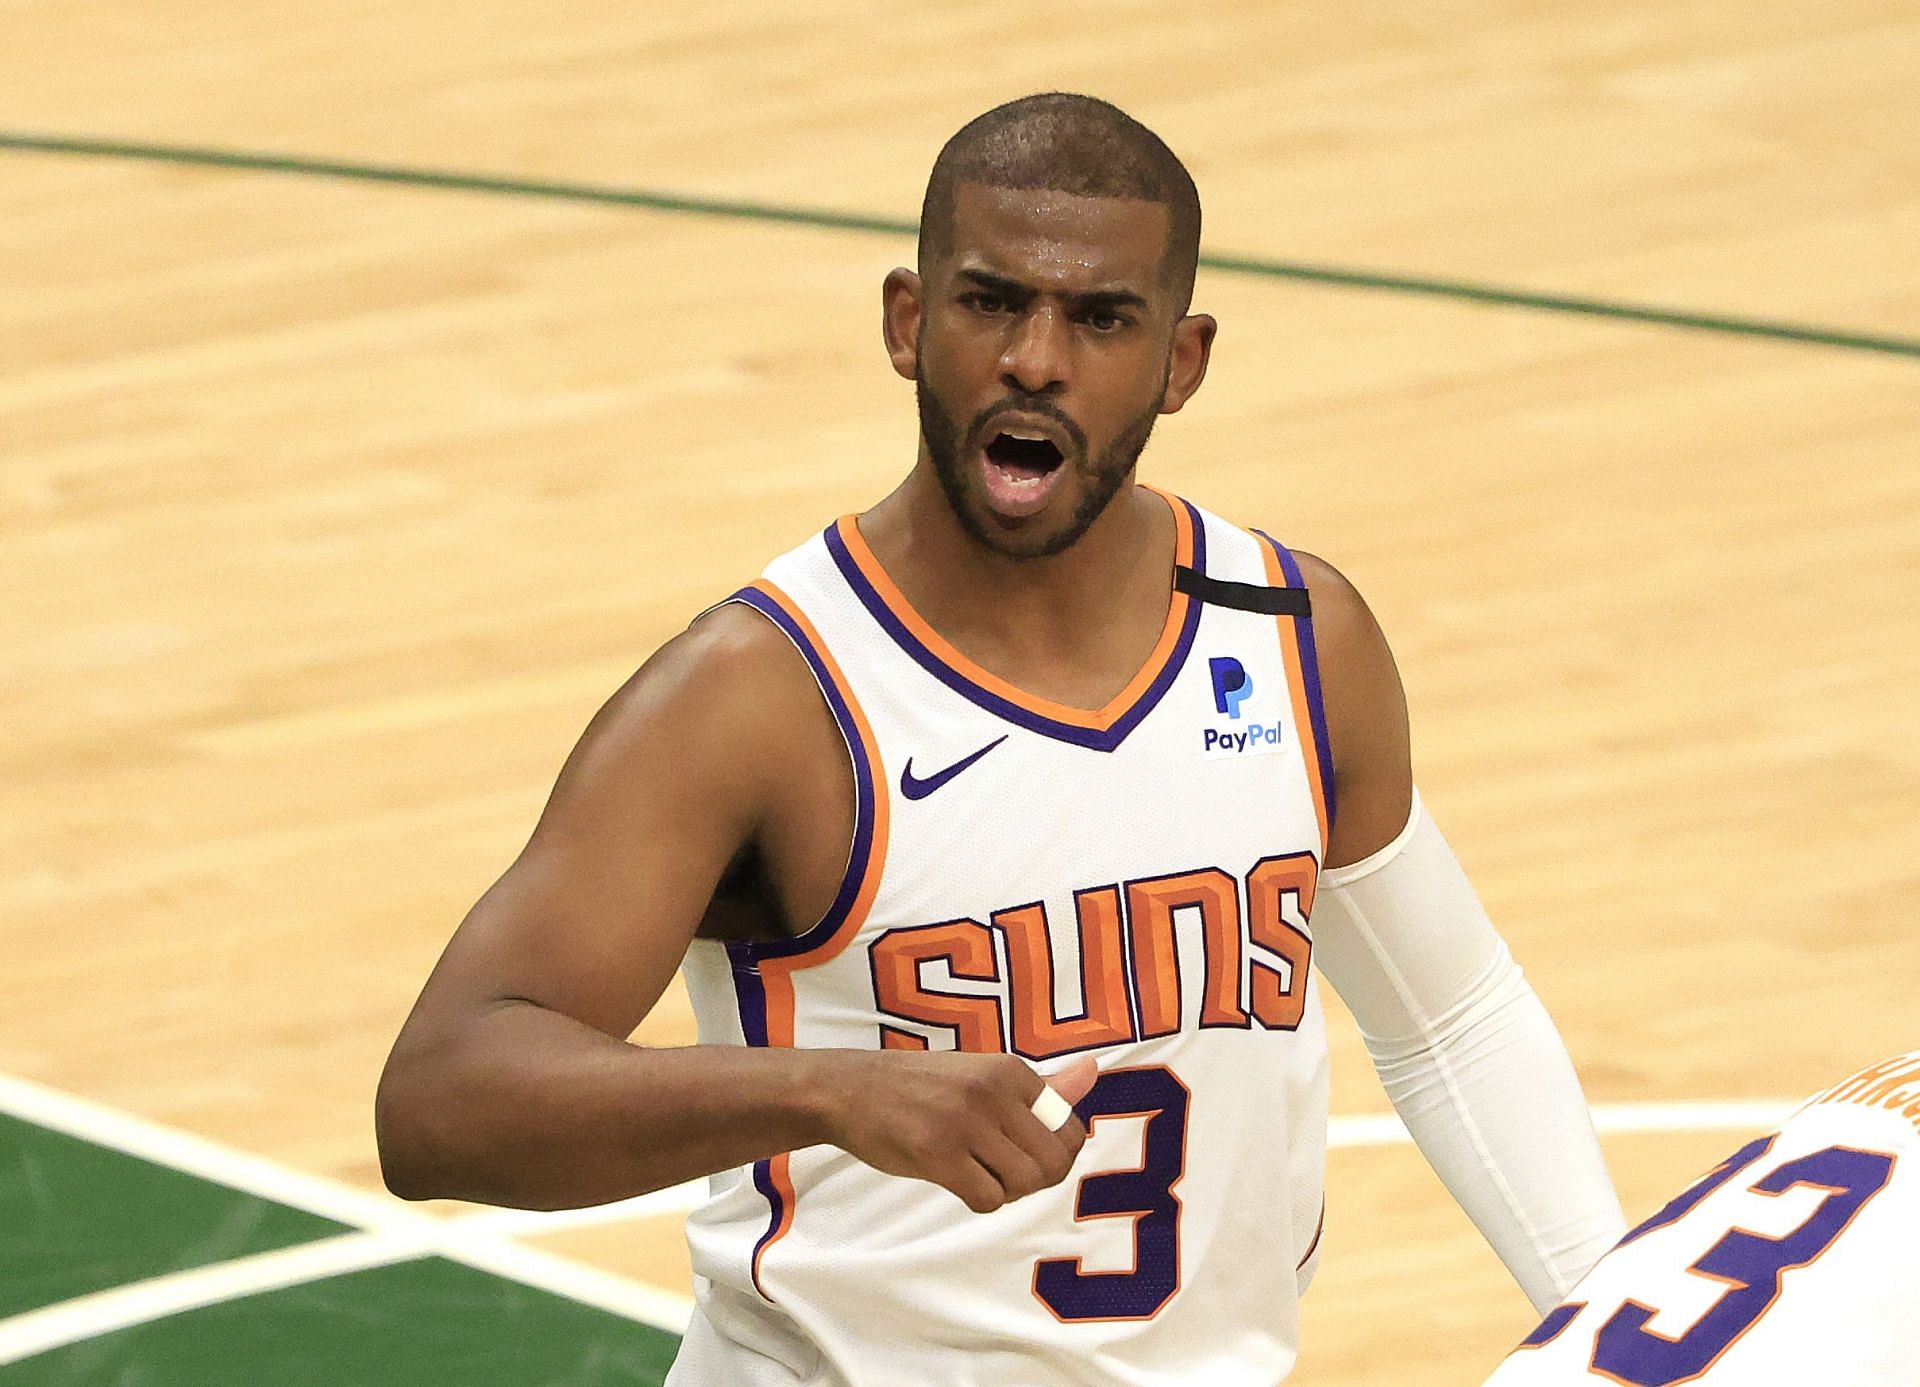 Chris Paul during his time with the Phoenix Suns